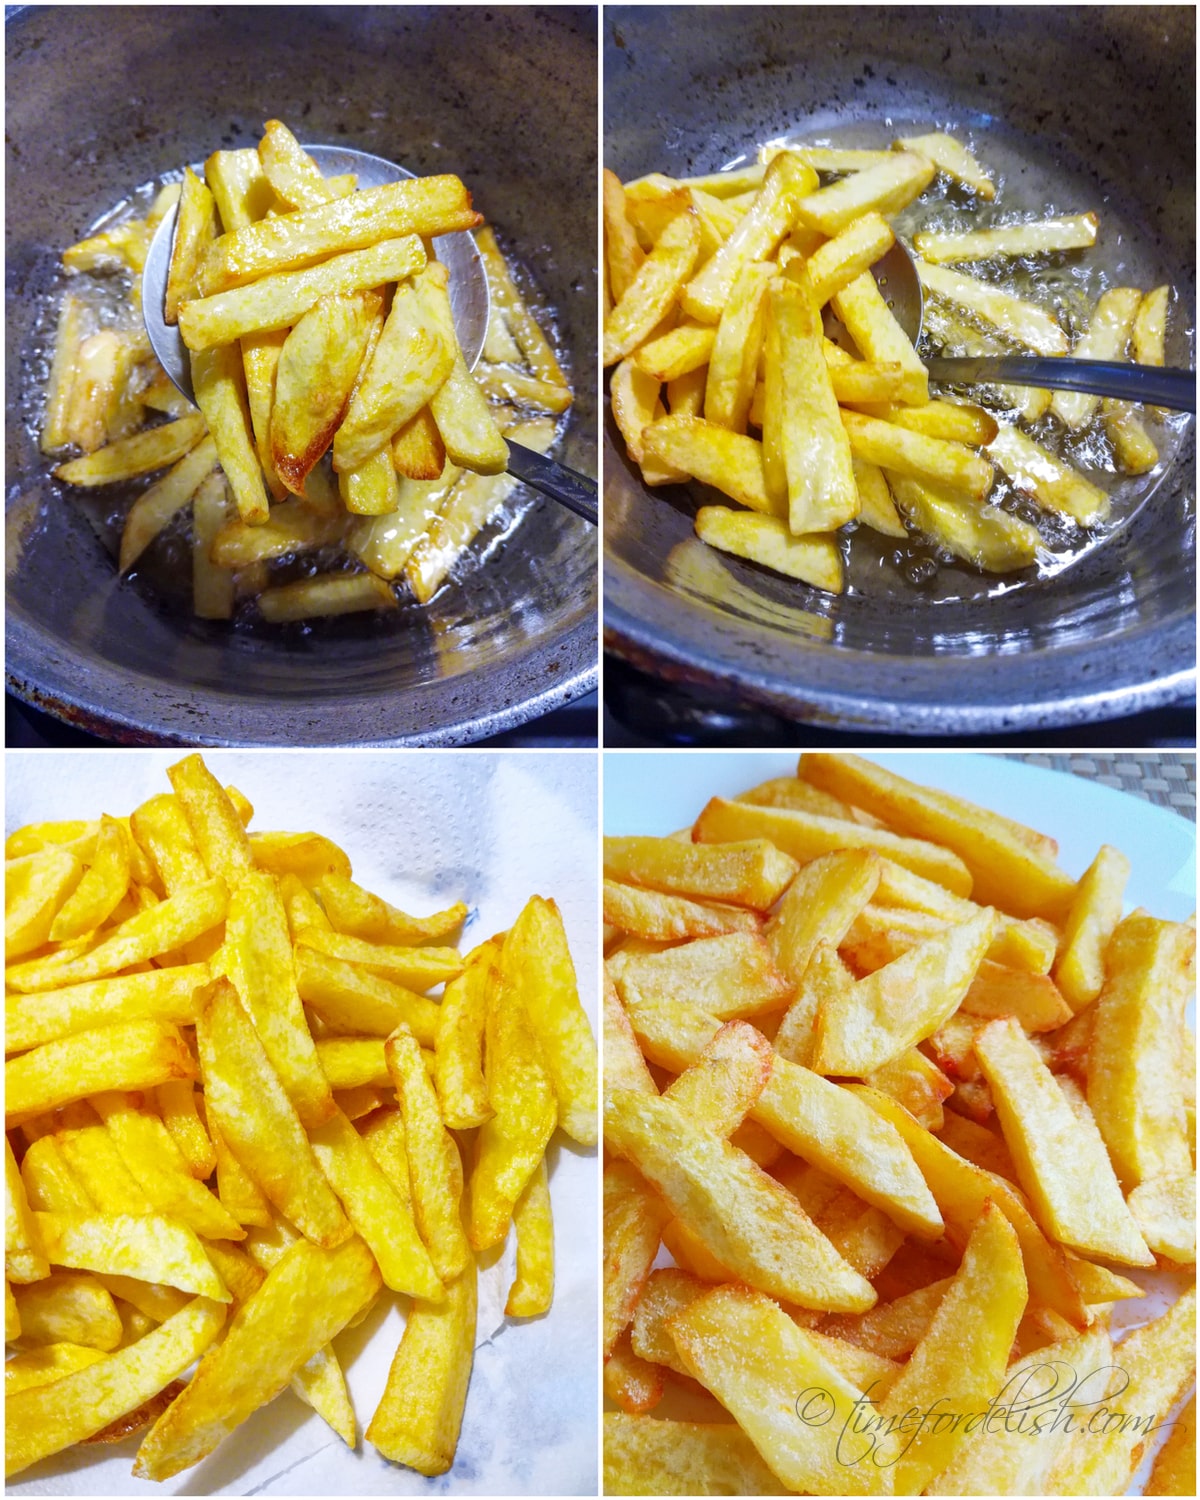 ho to make french fries at home